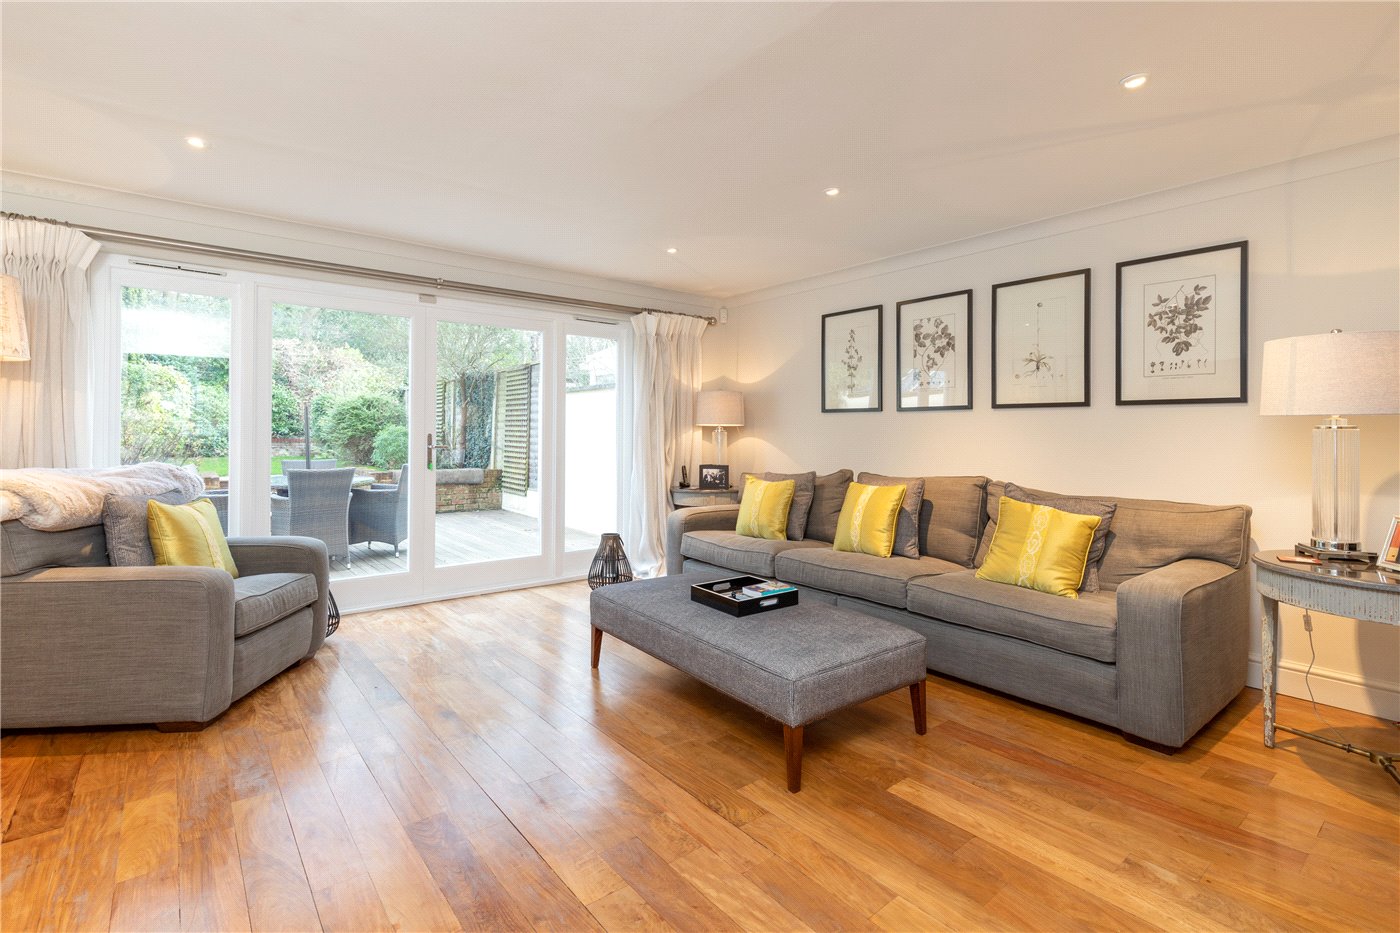 4 bedroom detached house for sale in Altrincham